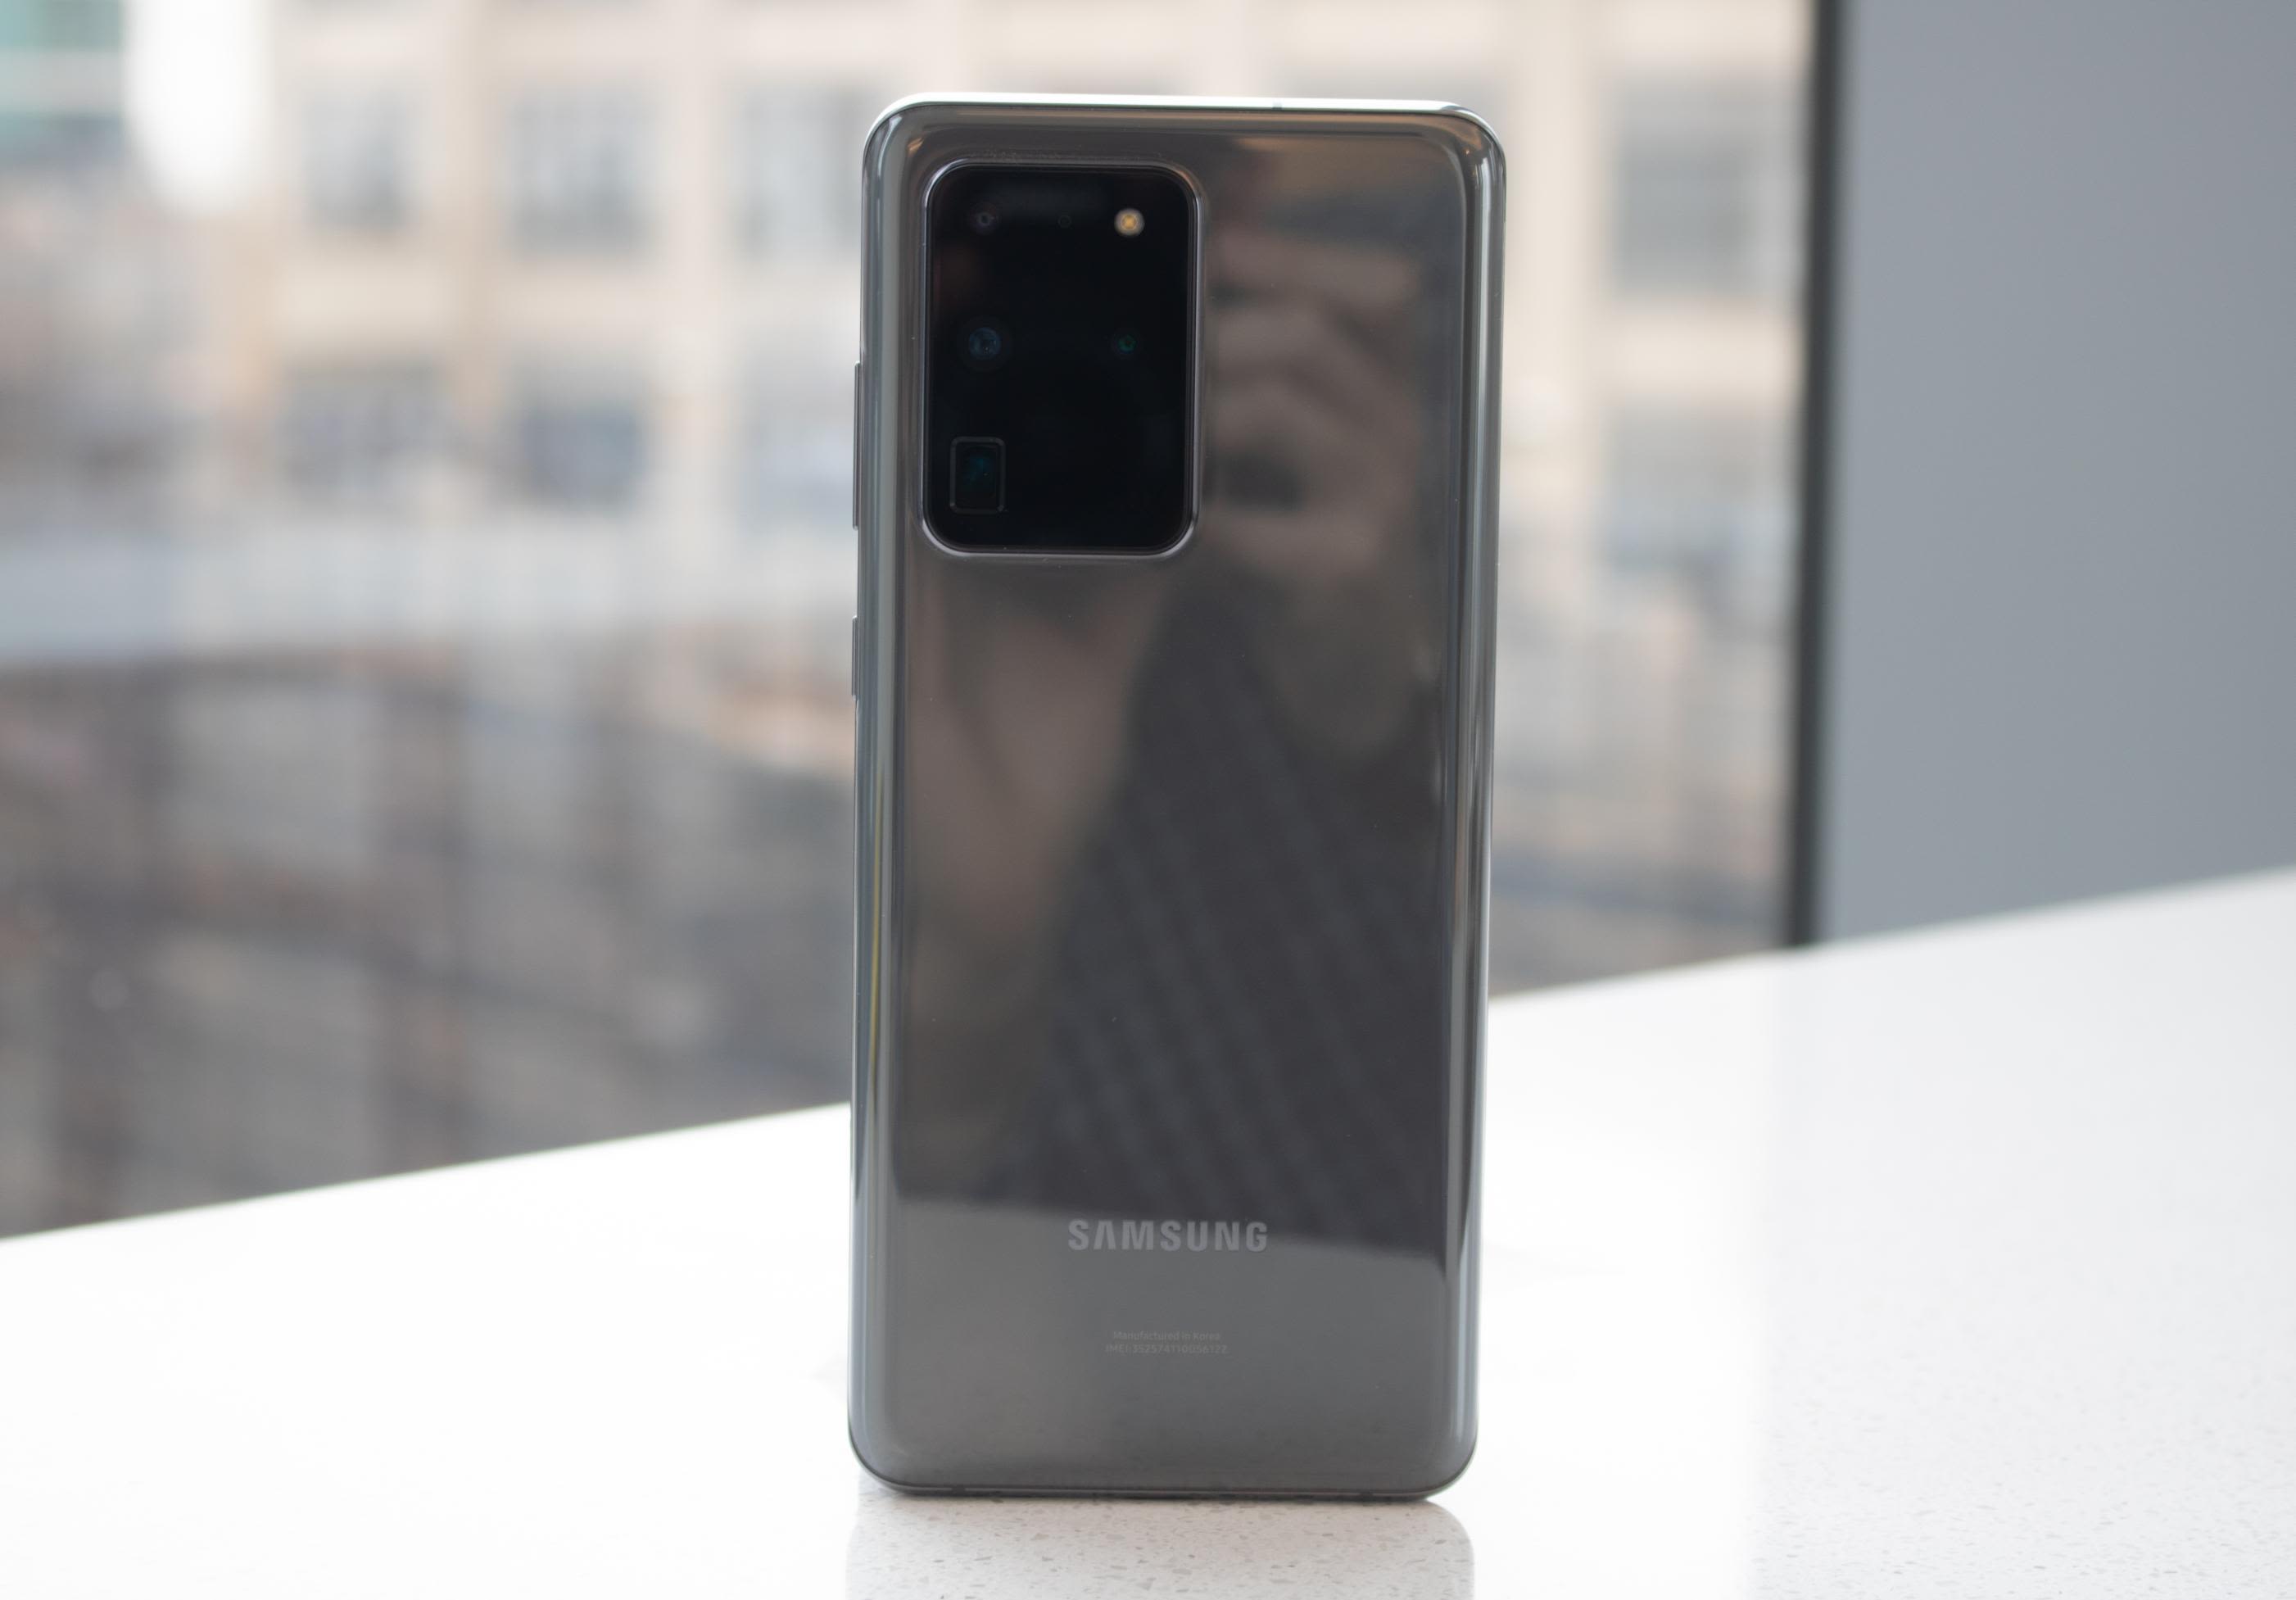 Samsung Galaxy S20 Ultra 5G review: 2020's most capable smartphone